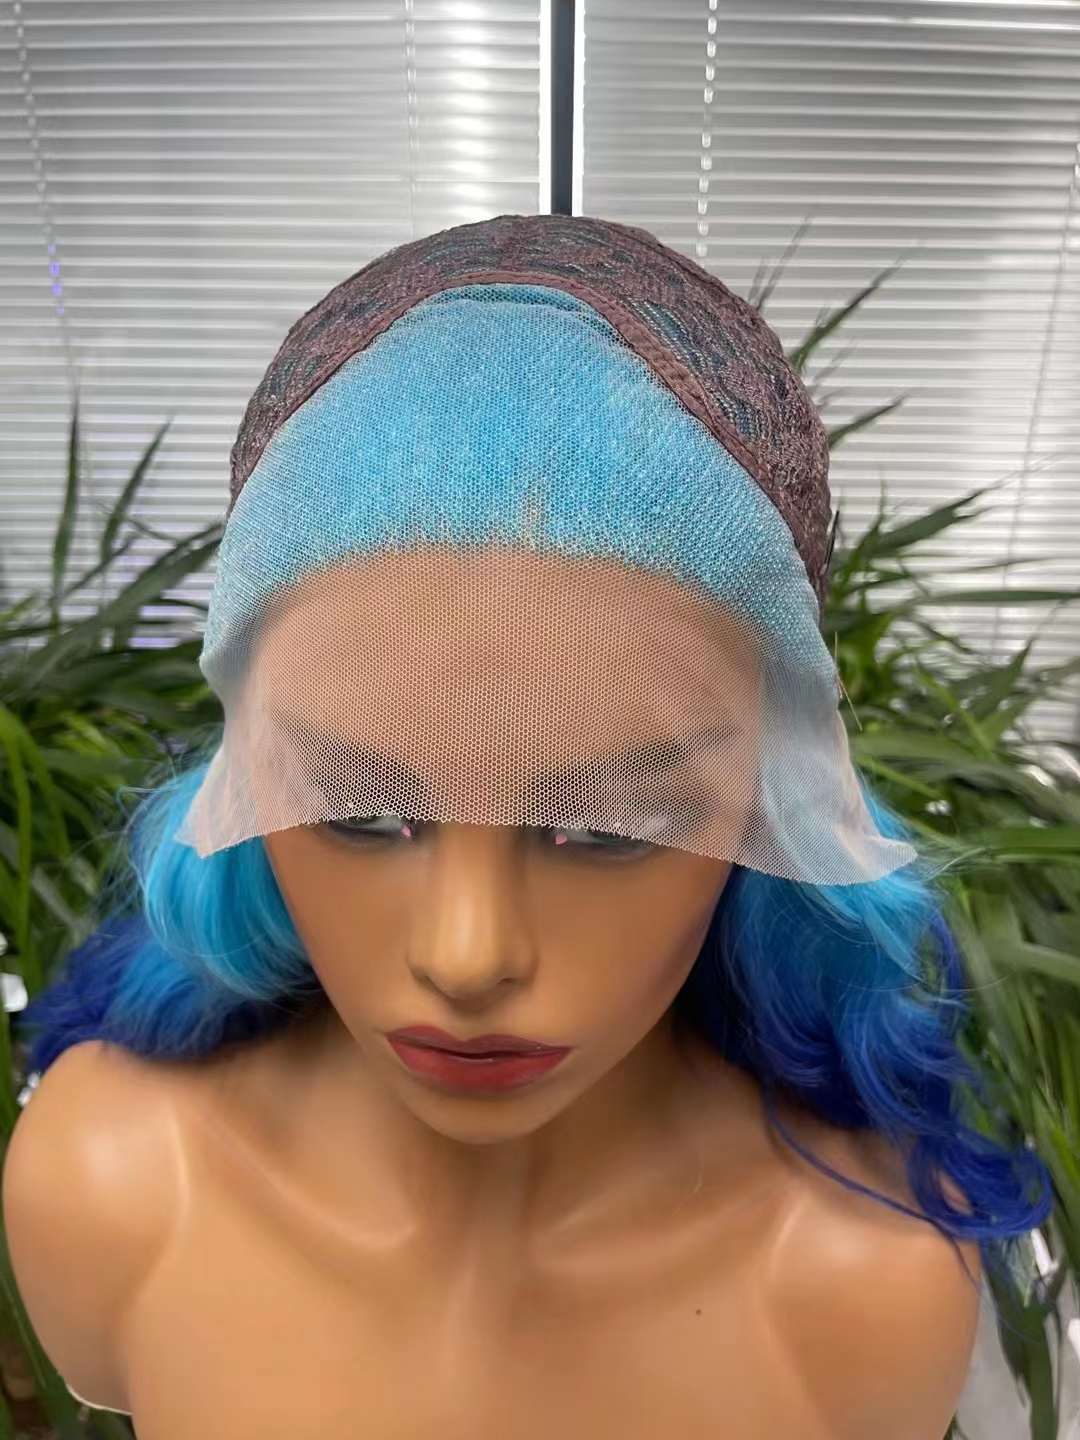 Soft Hair Blue Body Wave Wig For Women HD Lace Front Wig